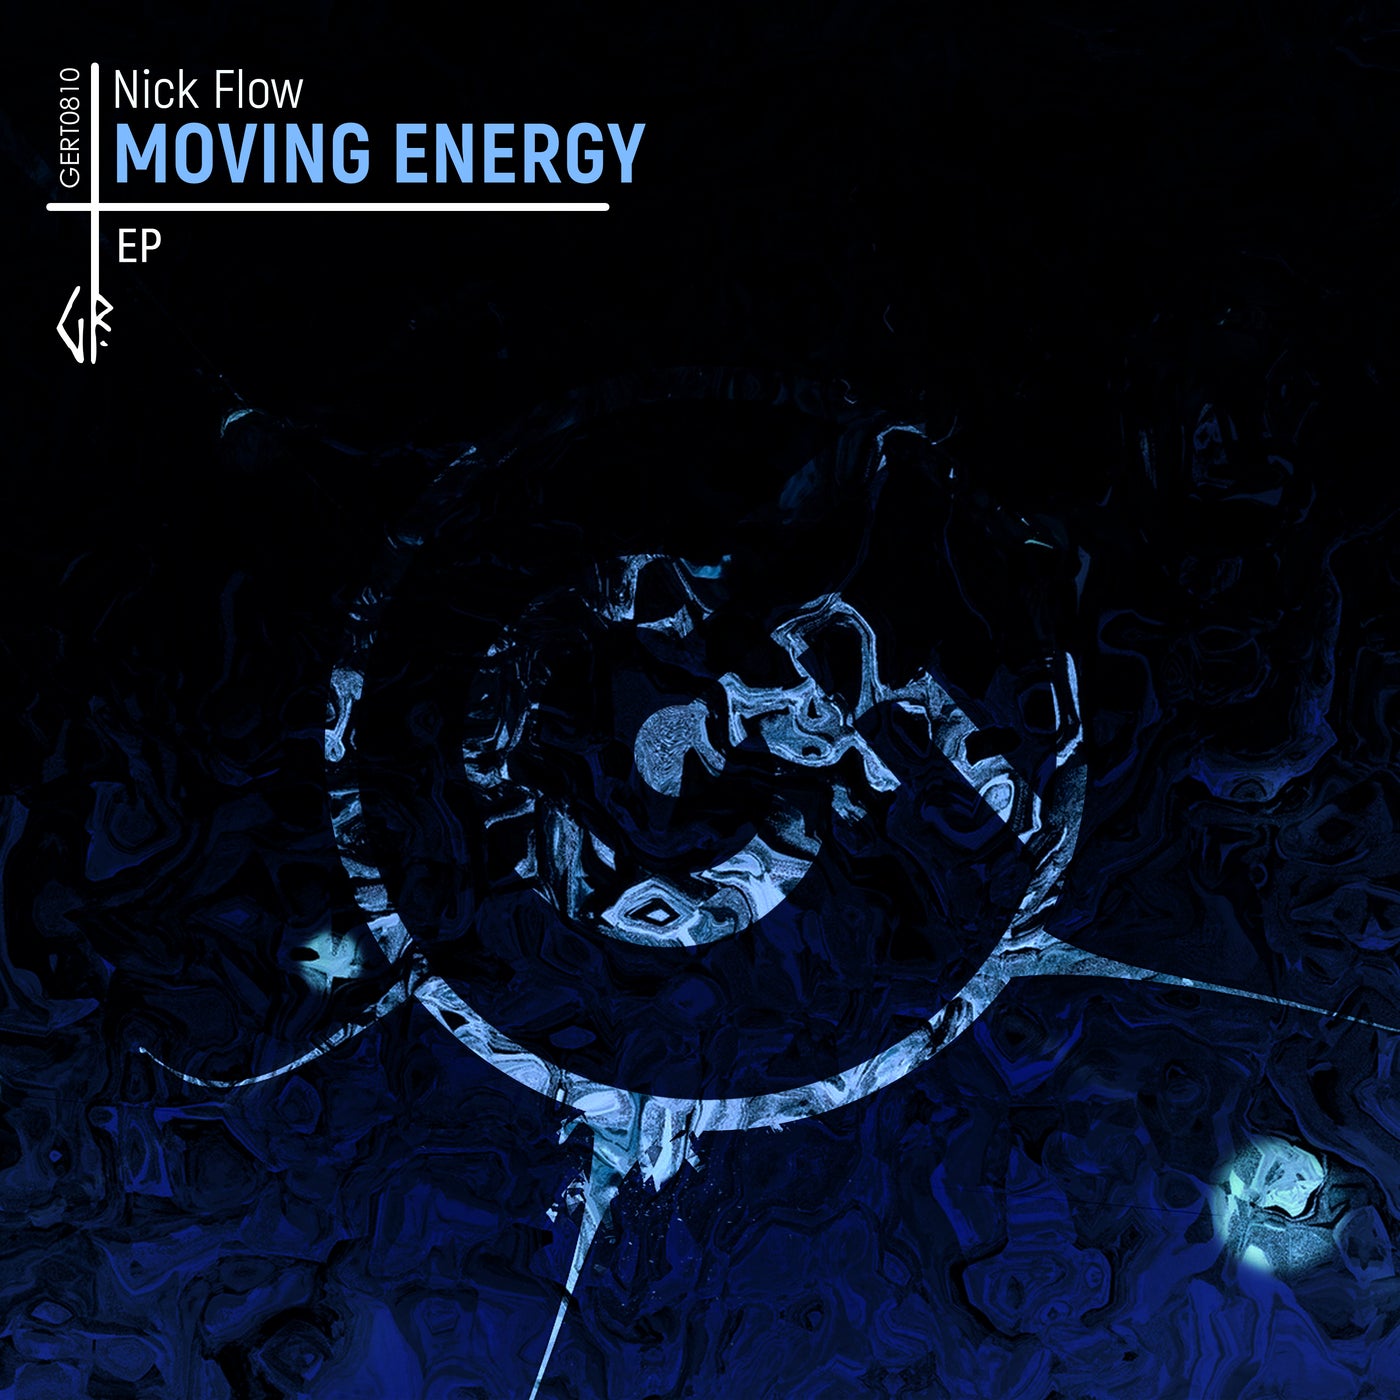 Moving Energy EP